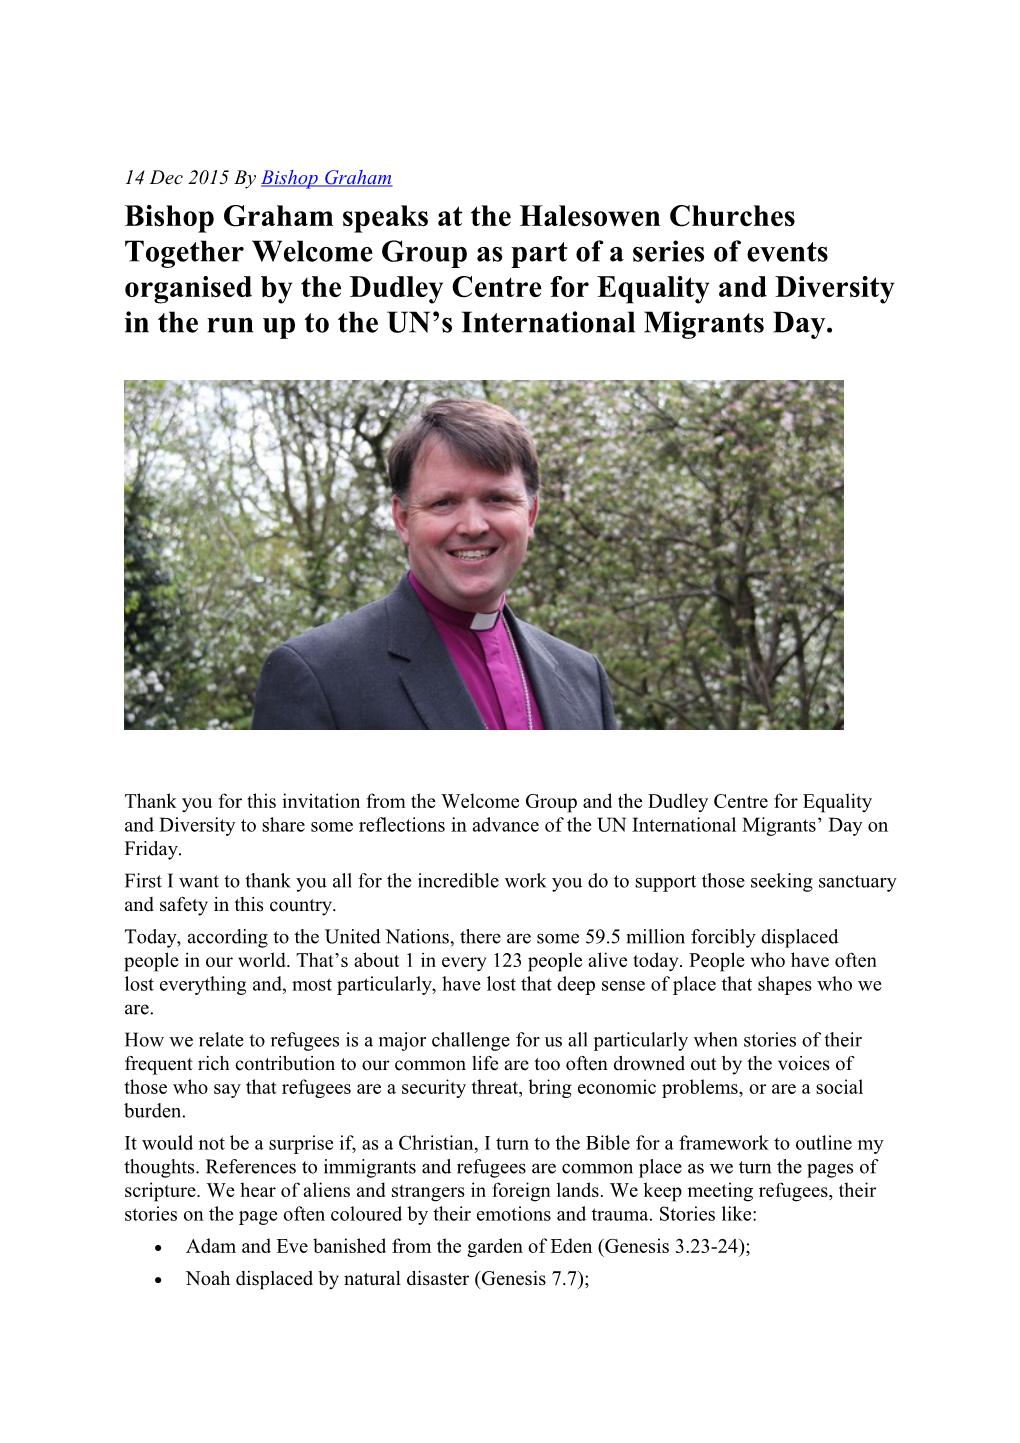 Bishop Graham Speaks at the Halesowen Churches Together Welcome Group As Part of a Series